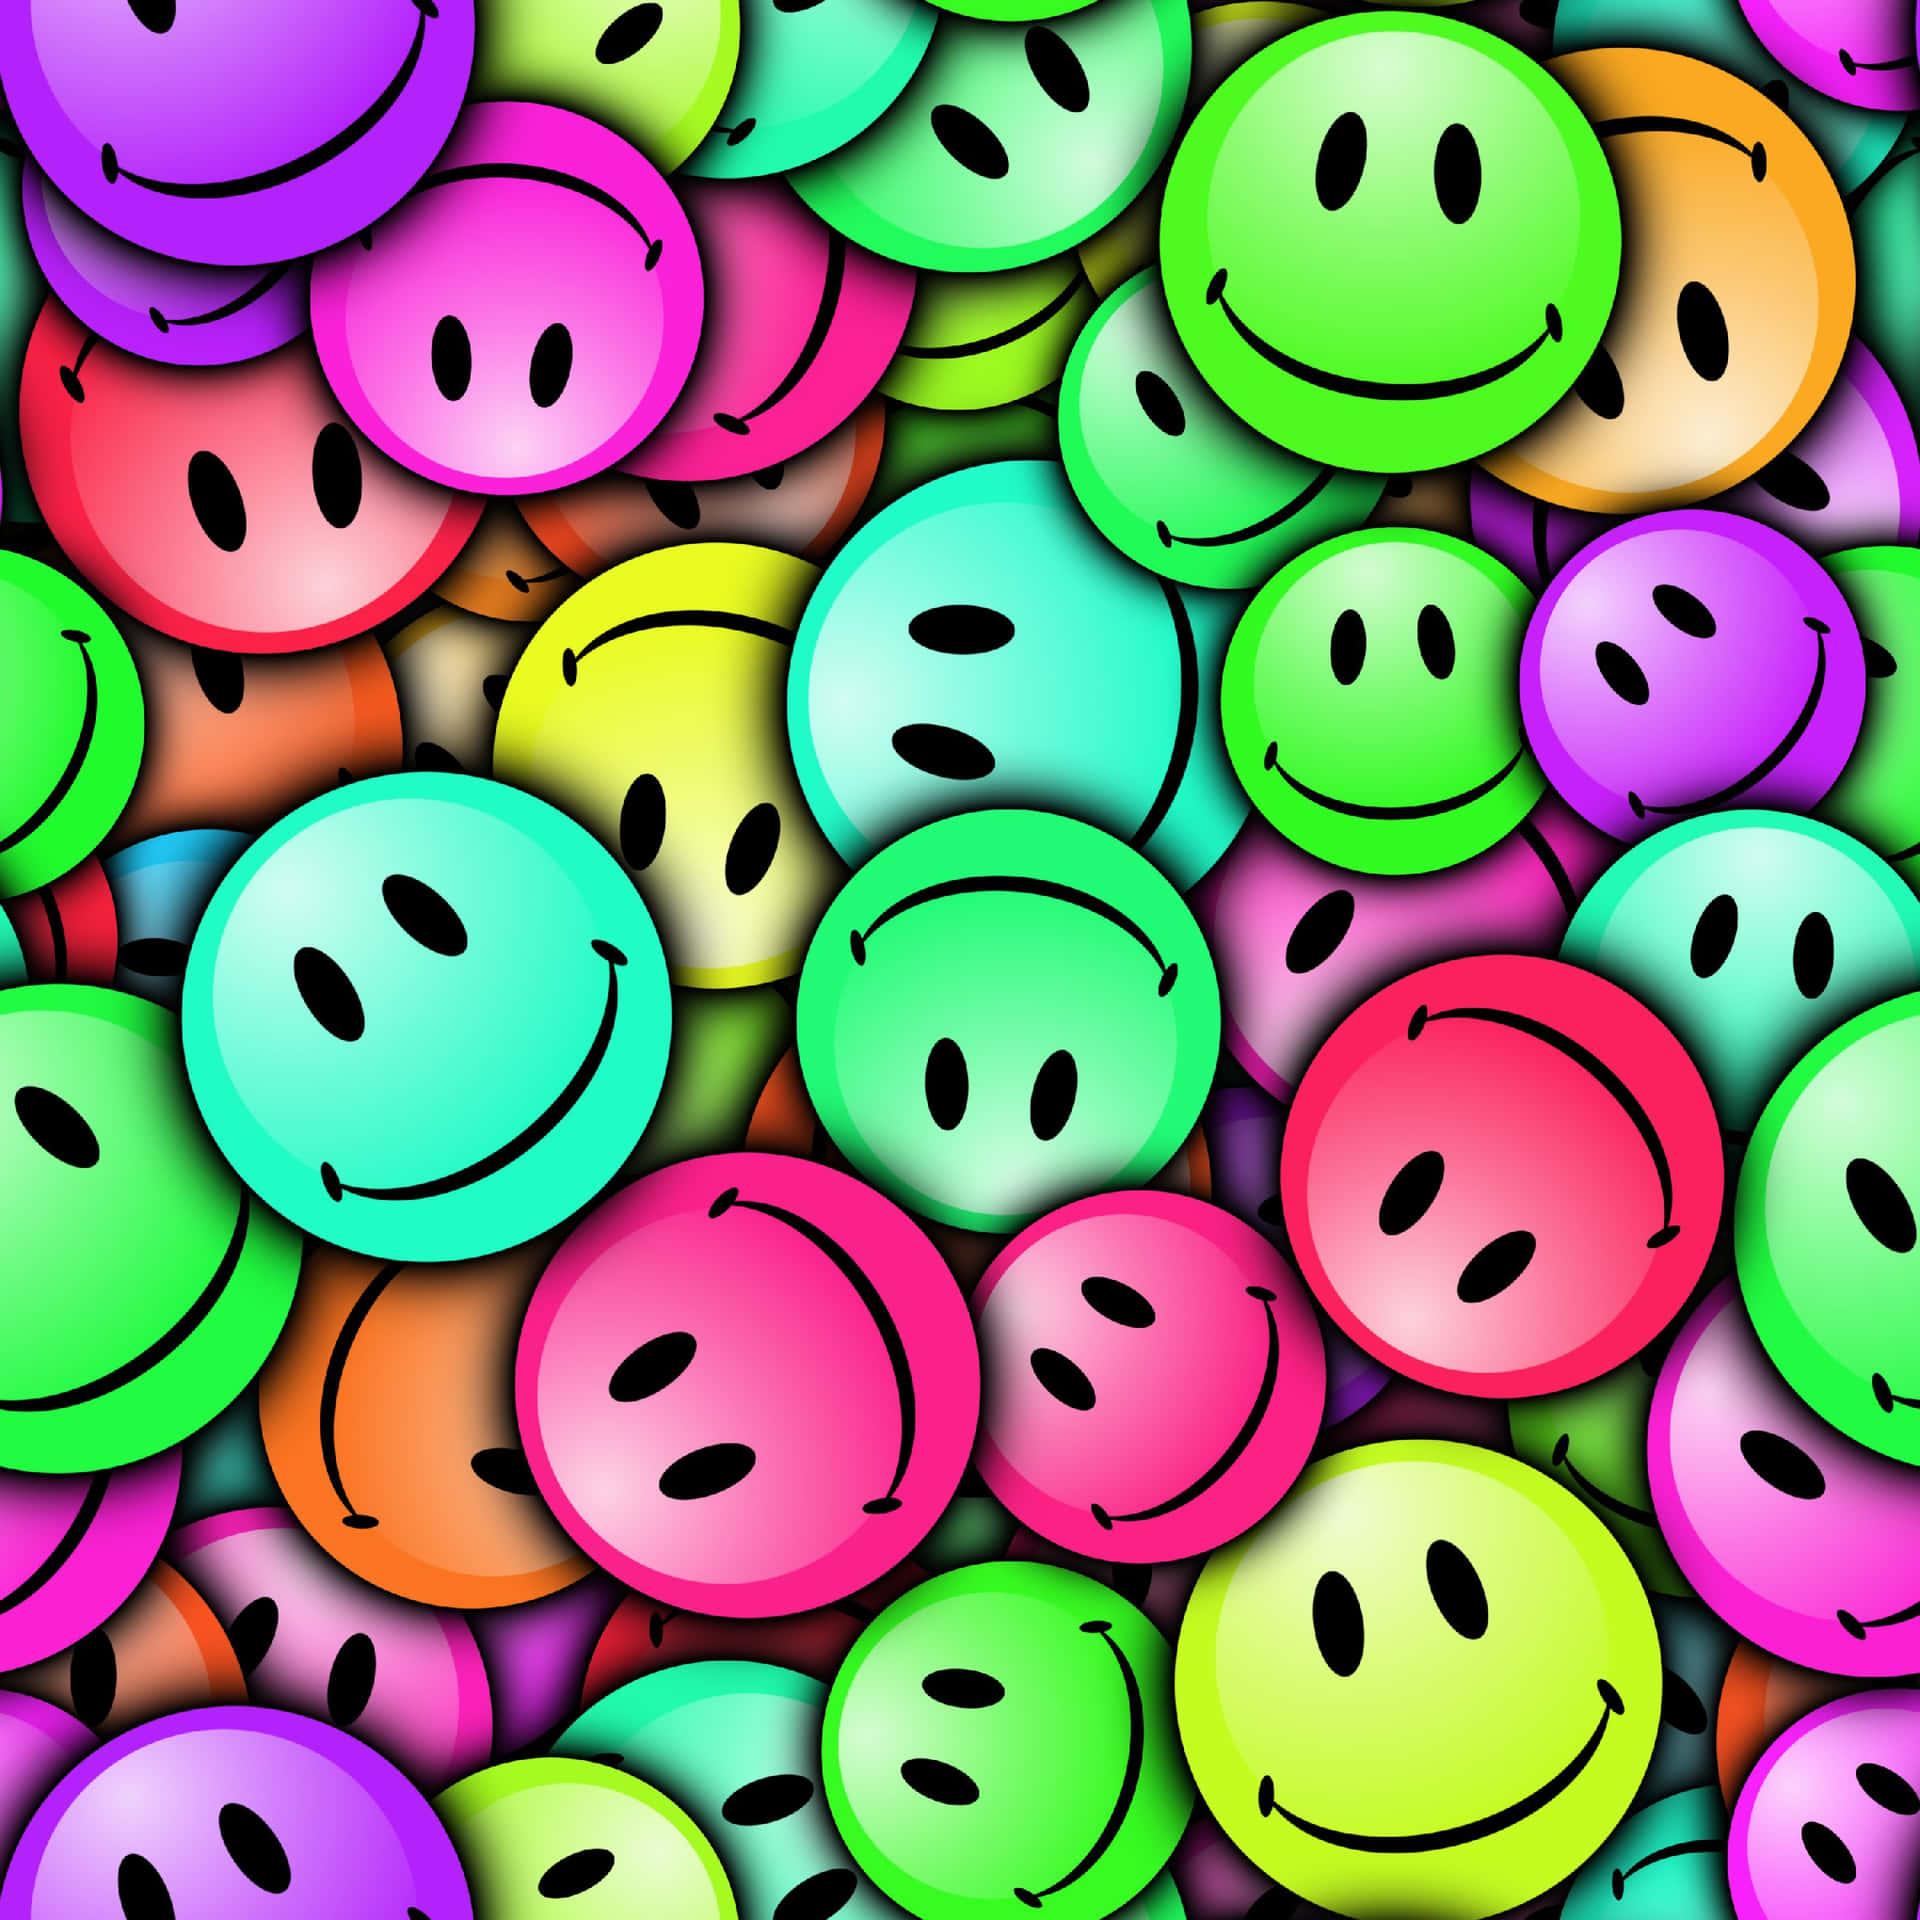 Colorful Smiley Faces Pattern.jpg Wallpaper